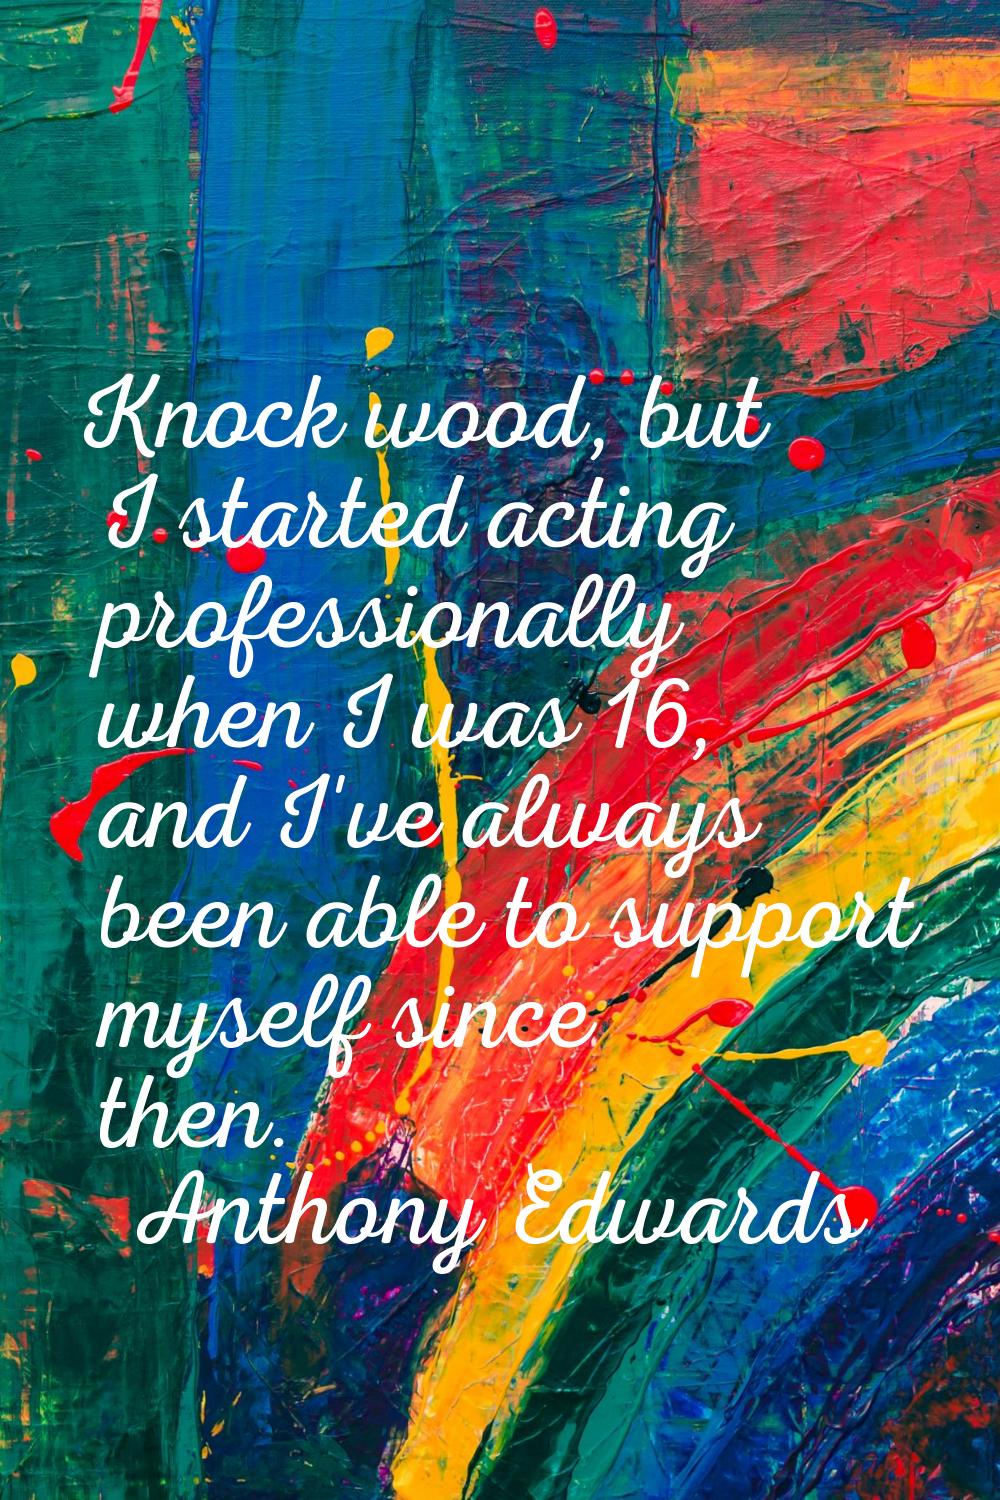 Knock wood, but I started acting professionally when I was 16, and I've always been able to support